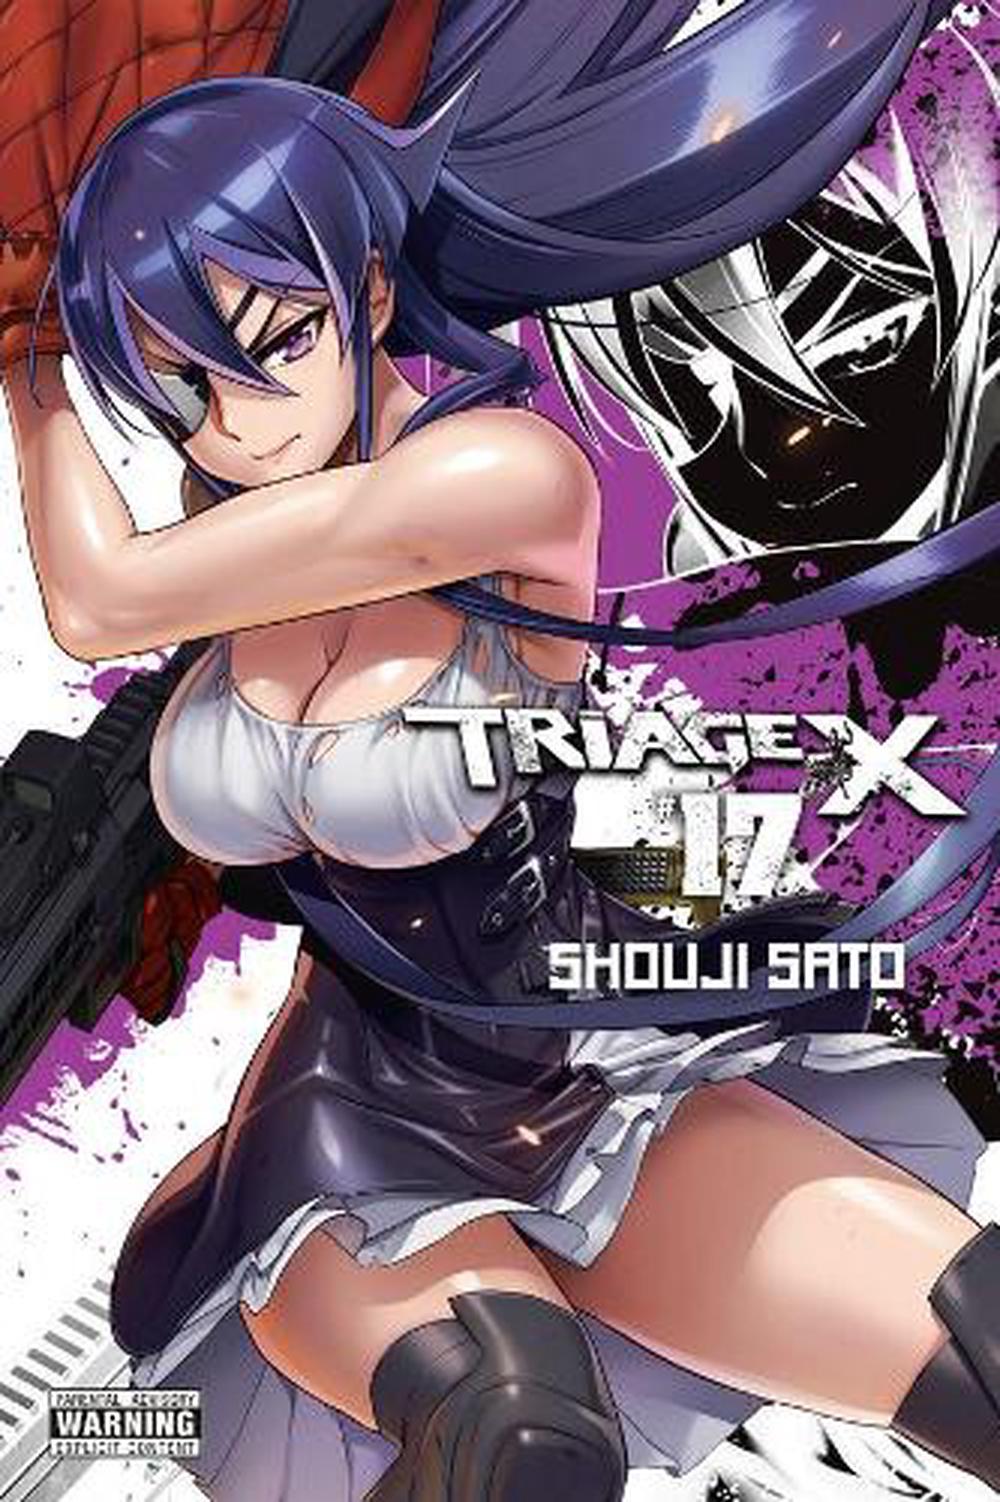 Triage X Vol 17 By Shouji Sato Paperback Buy Online At The Nile